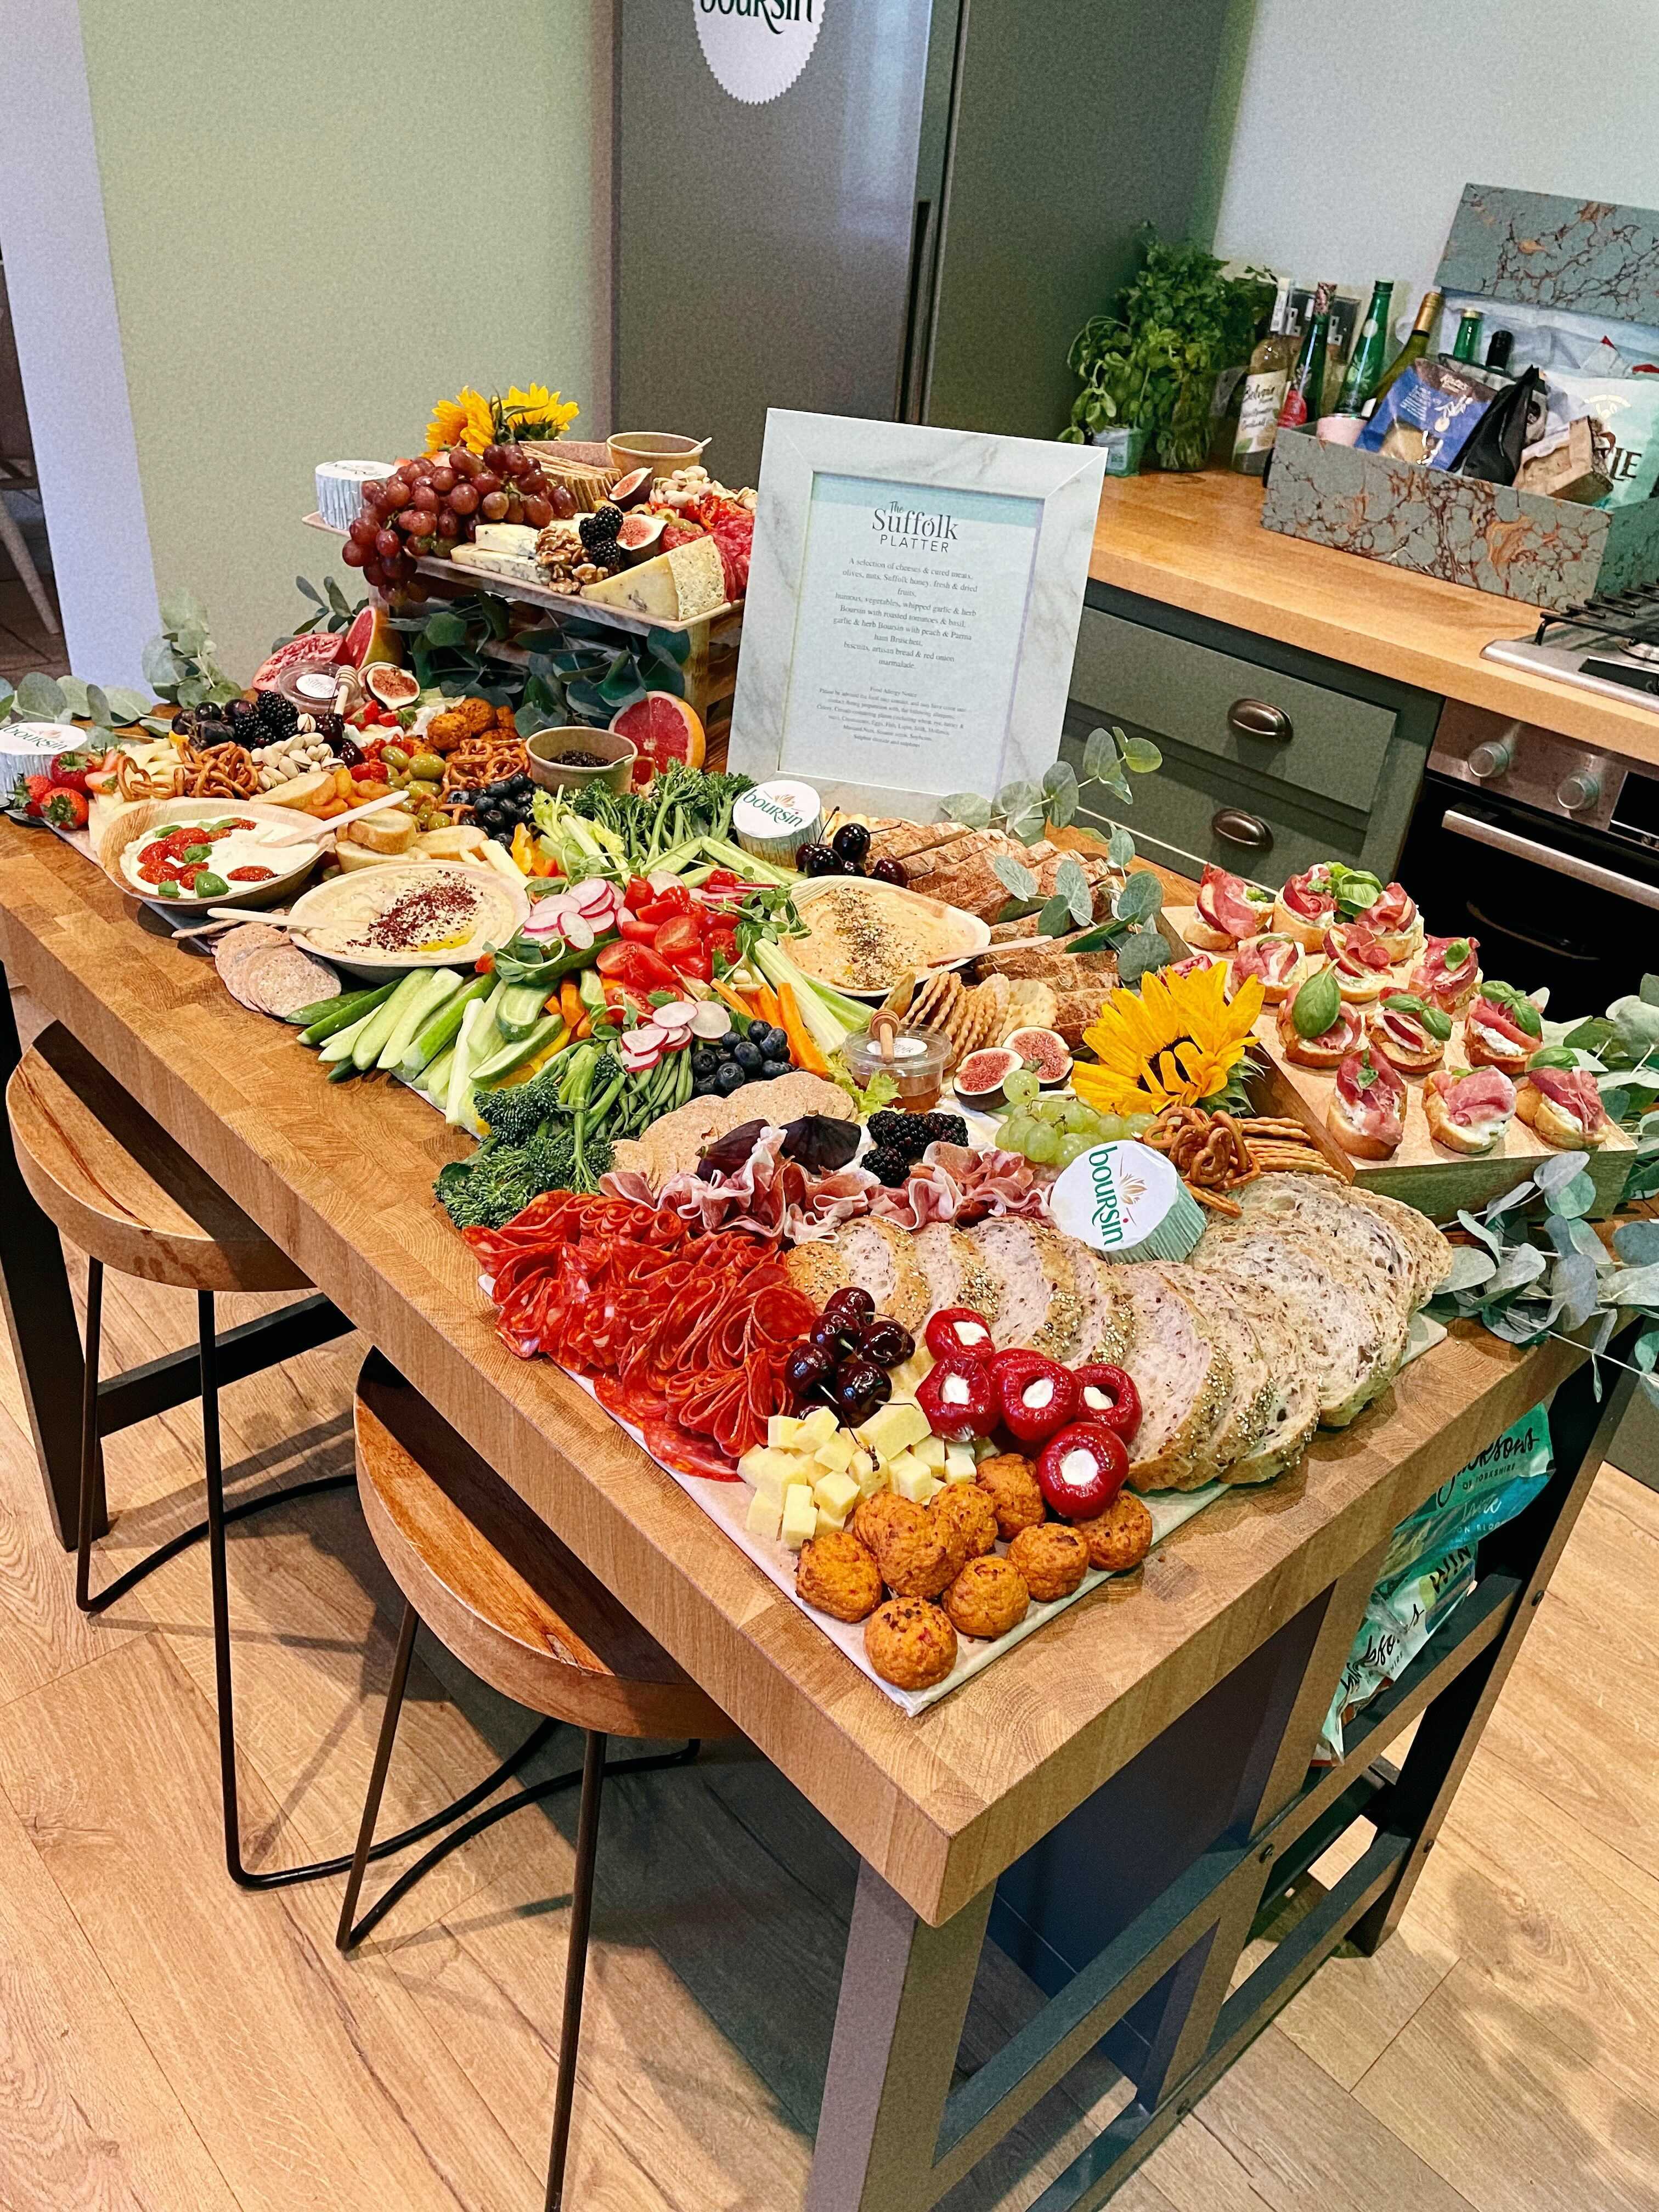 You’ll be greeted by The Suffolk’s Platter grazing board on your first night